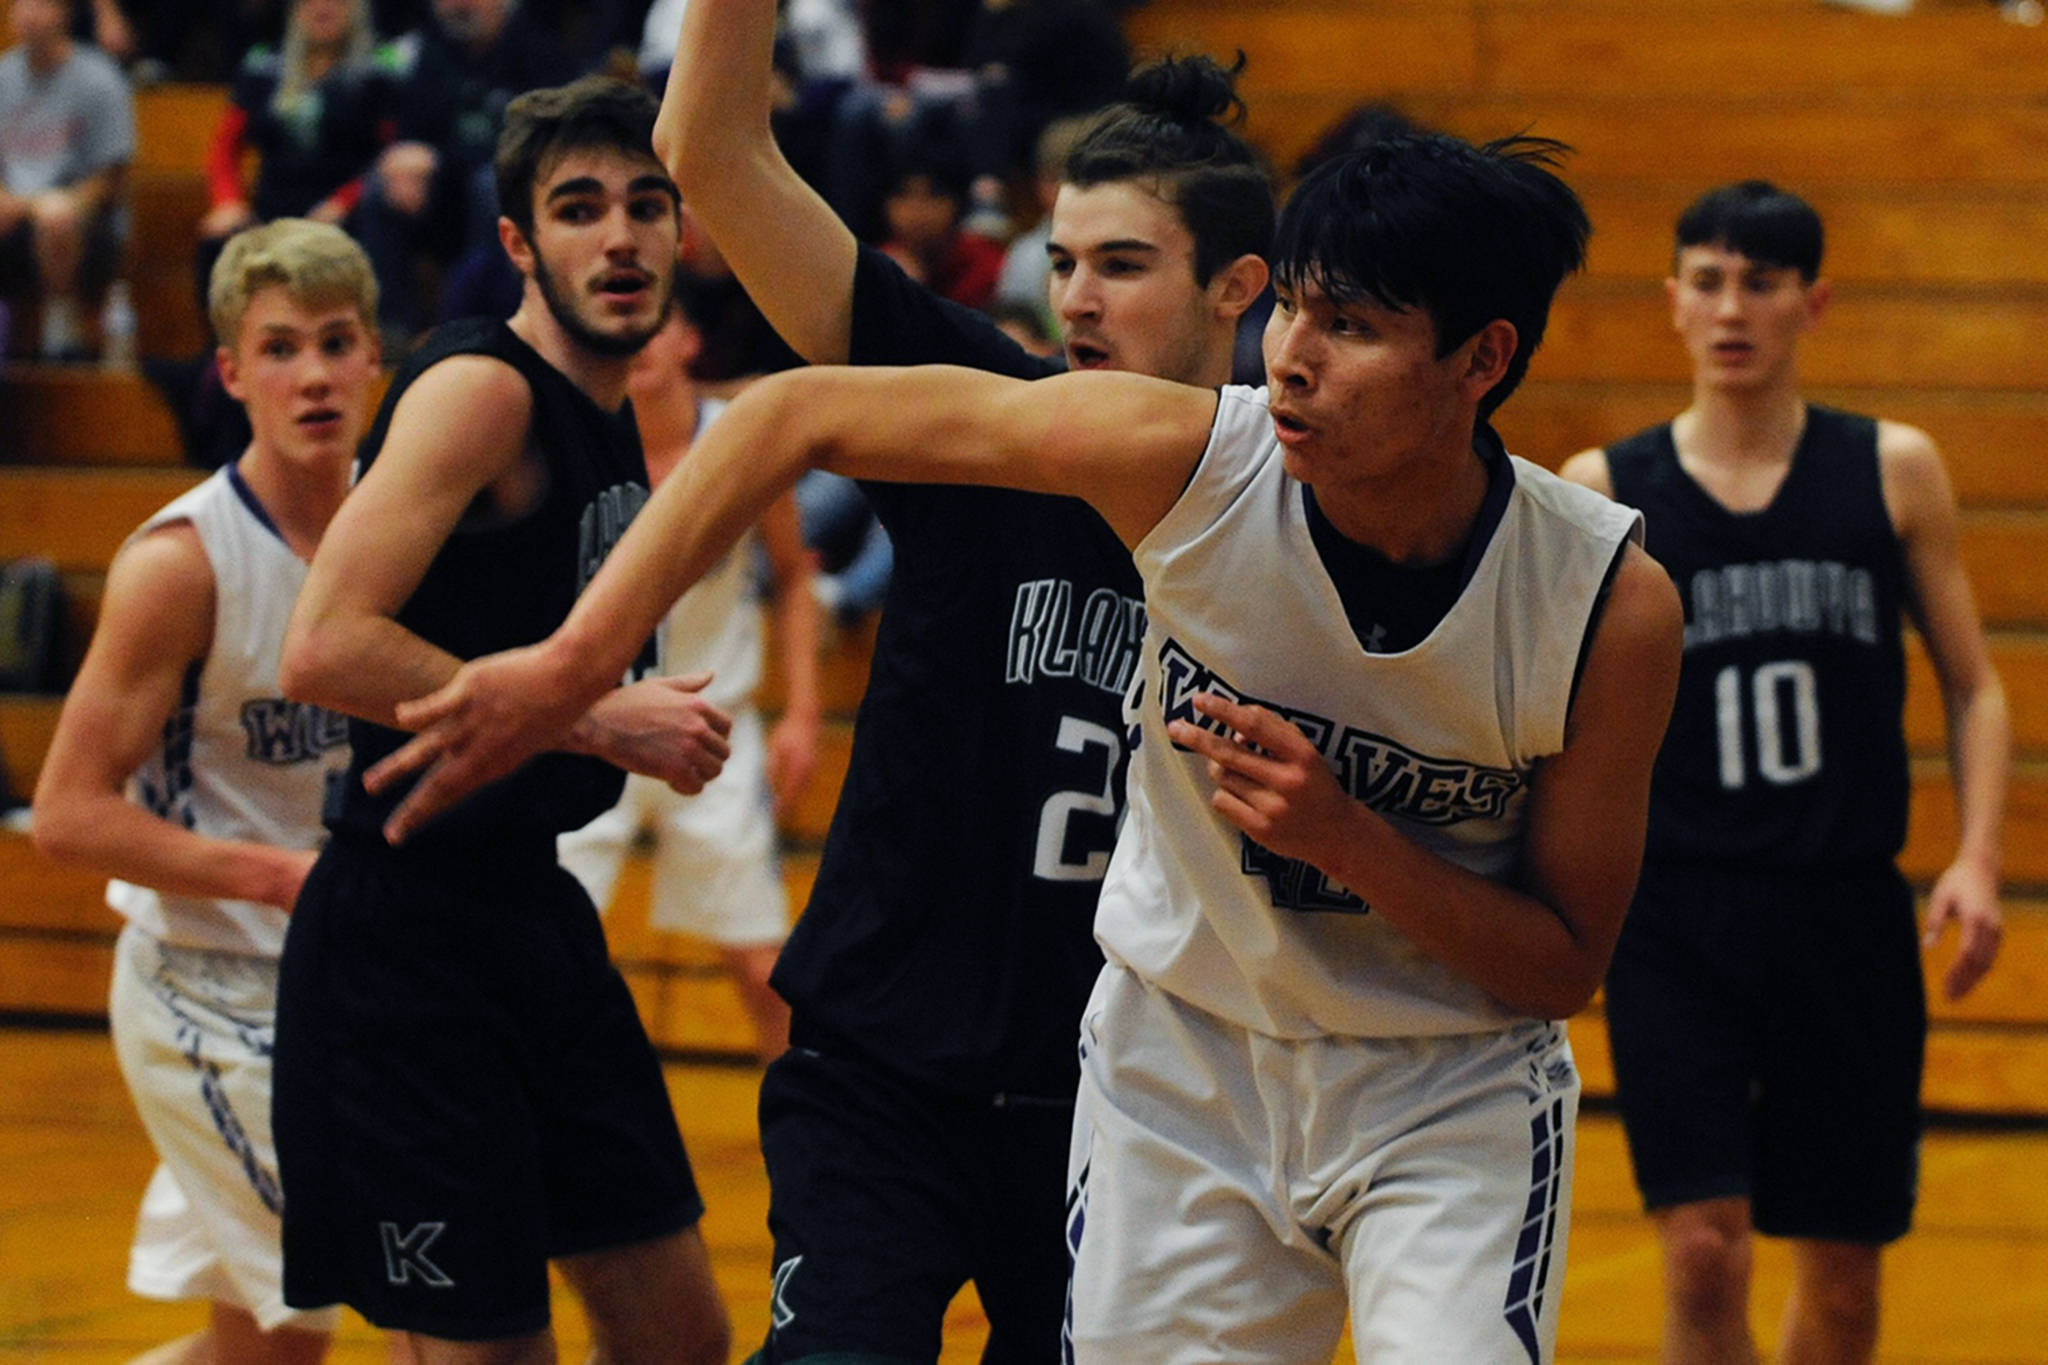 Sequim Wolves freshman forward Isaiah Moore, pictured second from right playing against the Klahowya Eagles on Dec. 2, scored 45 points with 32 rebounds and 6 blocks in his first four games of the season. Sequim Gazette photo by Conor Dowley